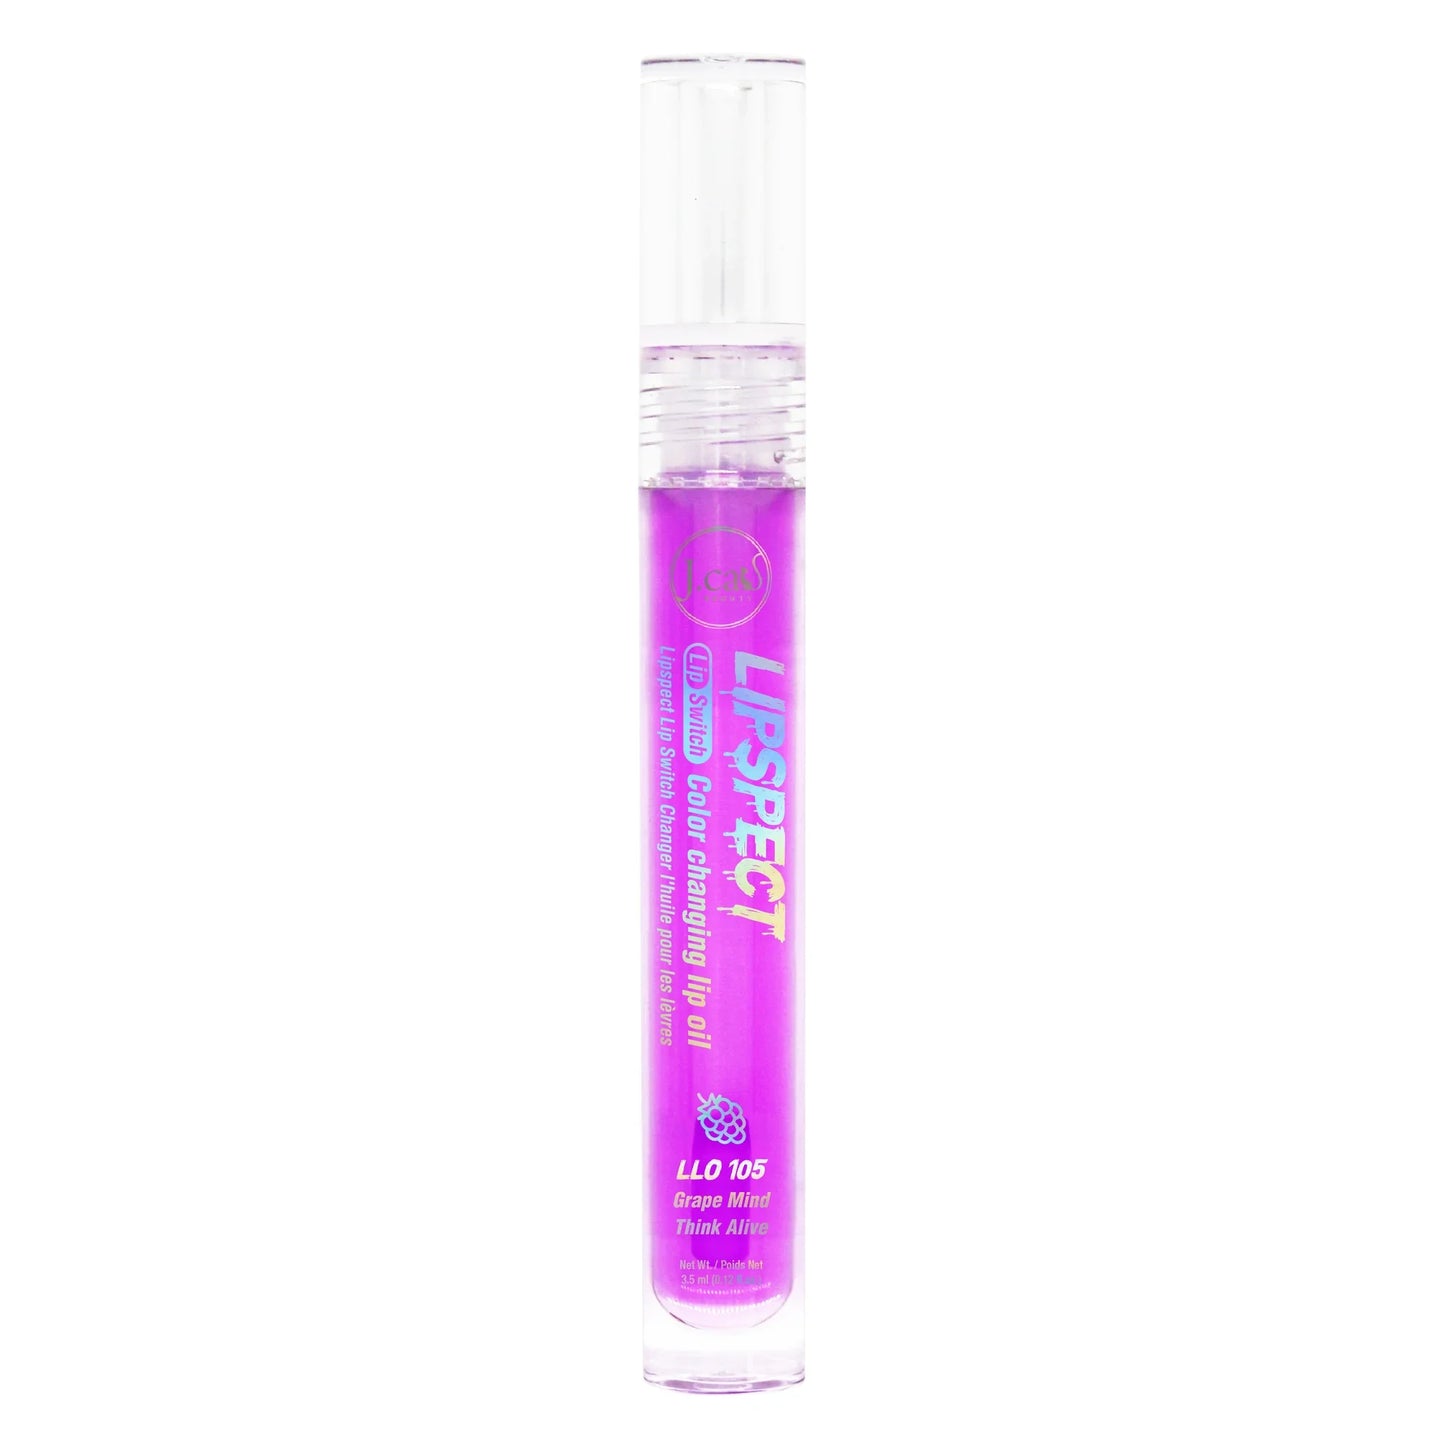 J. CAT BEAUTY LIPSPECT LIP SWITCH COLOR CHANGING LIP OIL